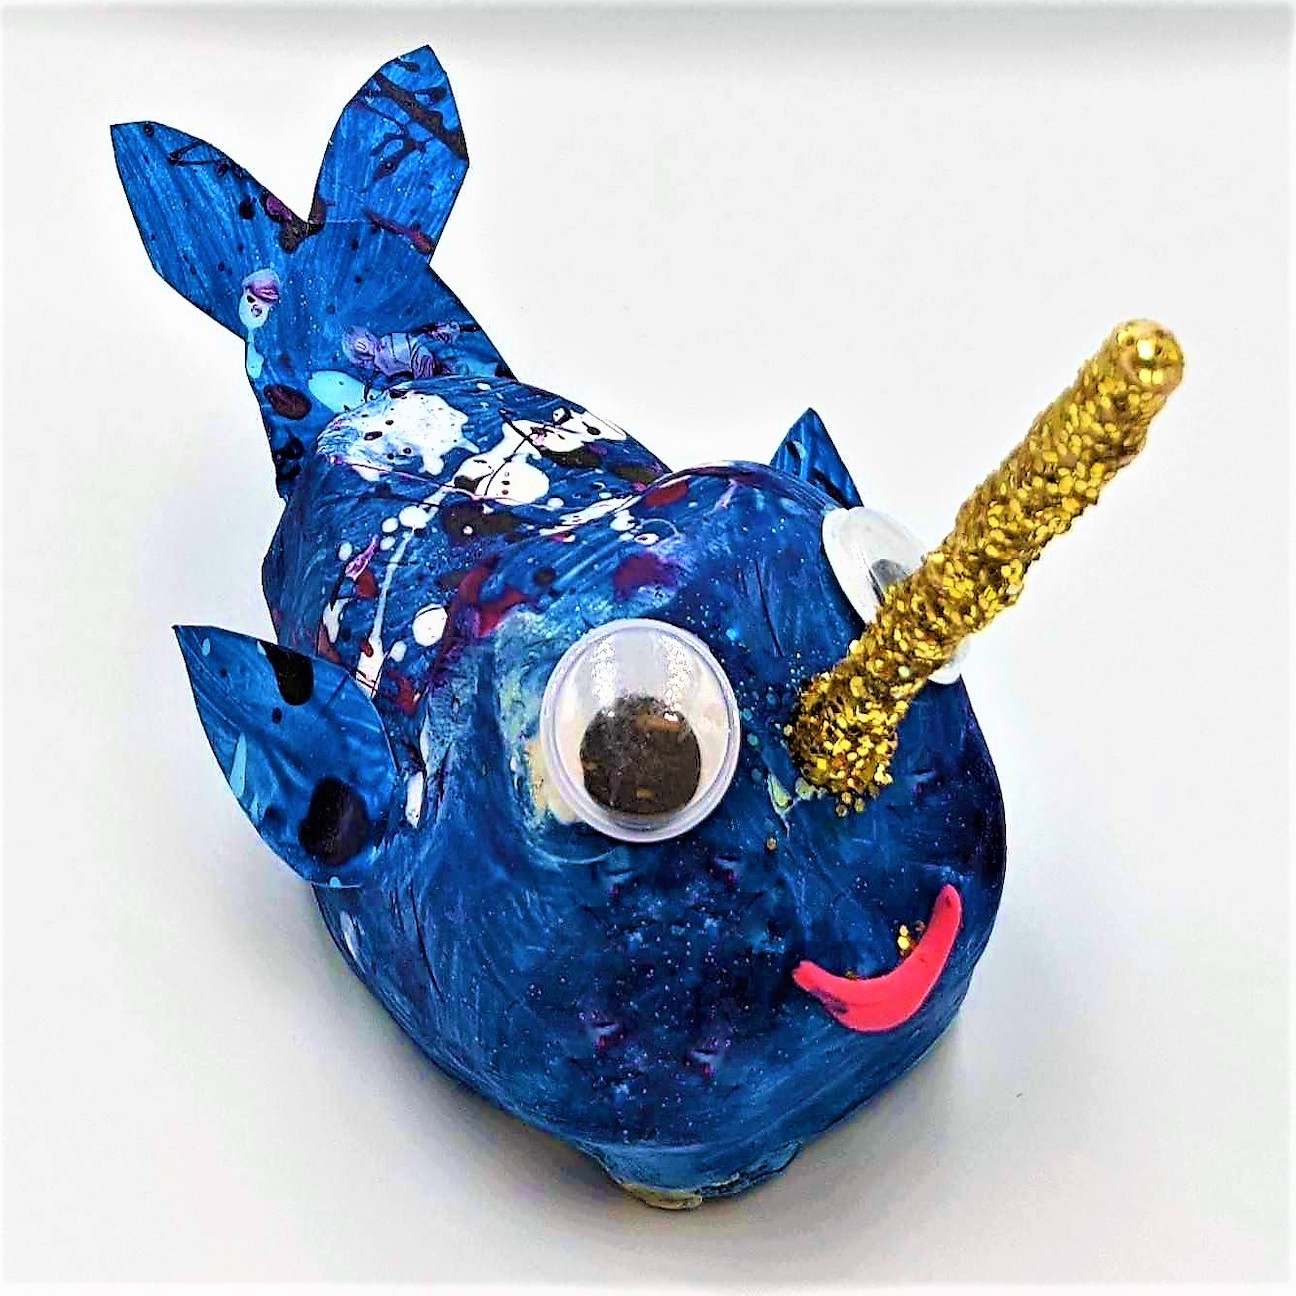 Kidcreate Mobile Studio - Kansas City, Nifty Narwhal Art Project